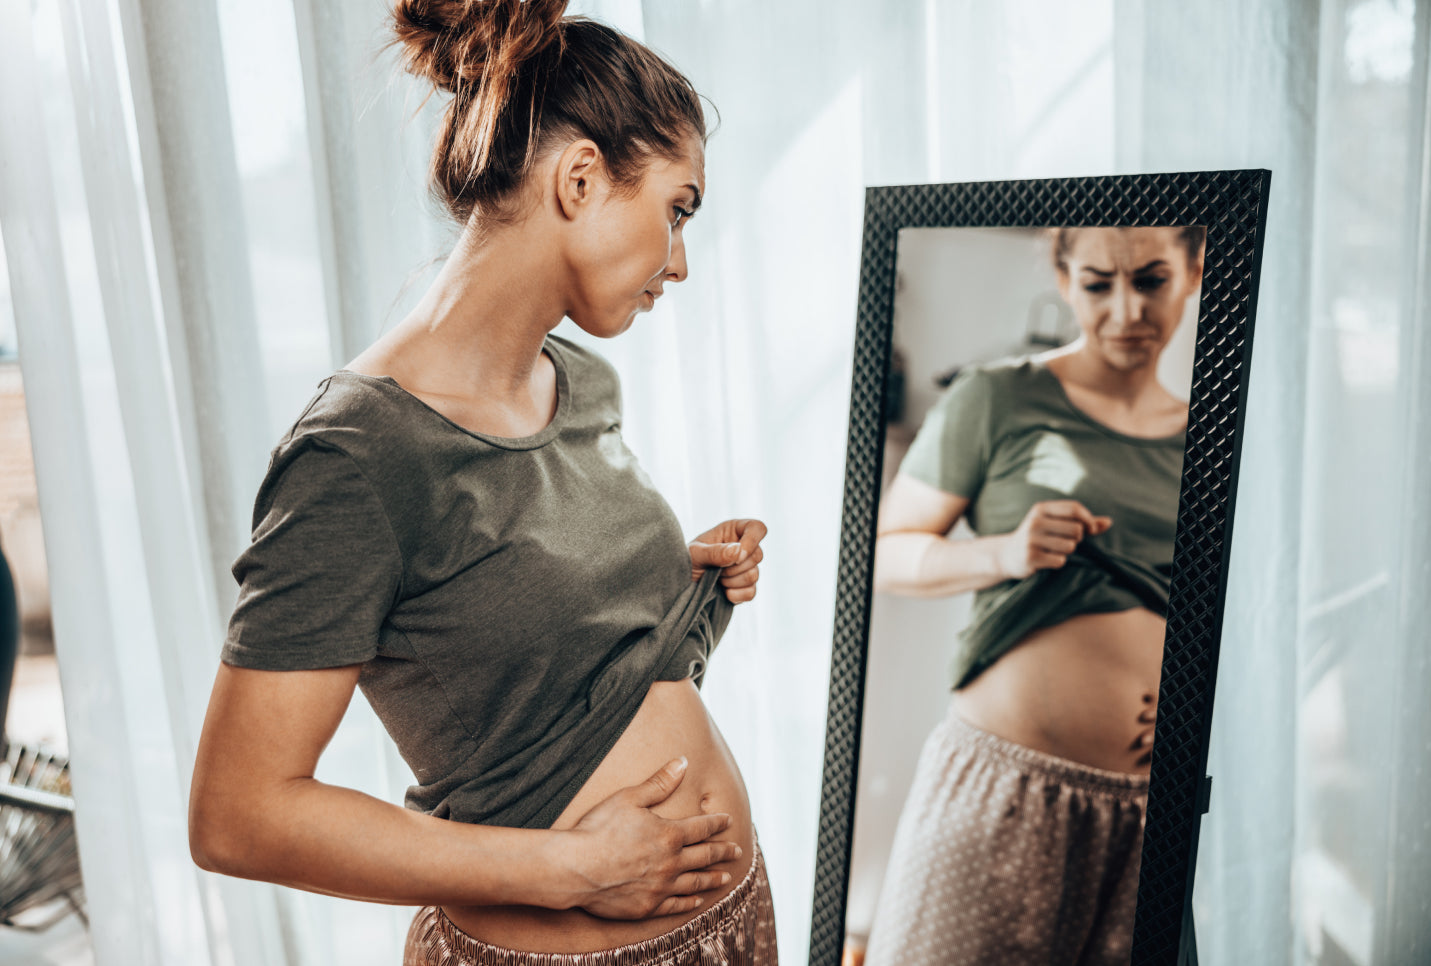 Bloating and Weight Gain: Is There a Connection?